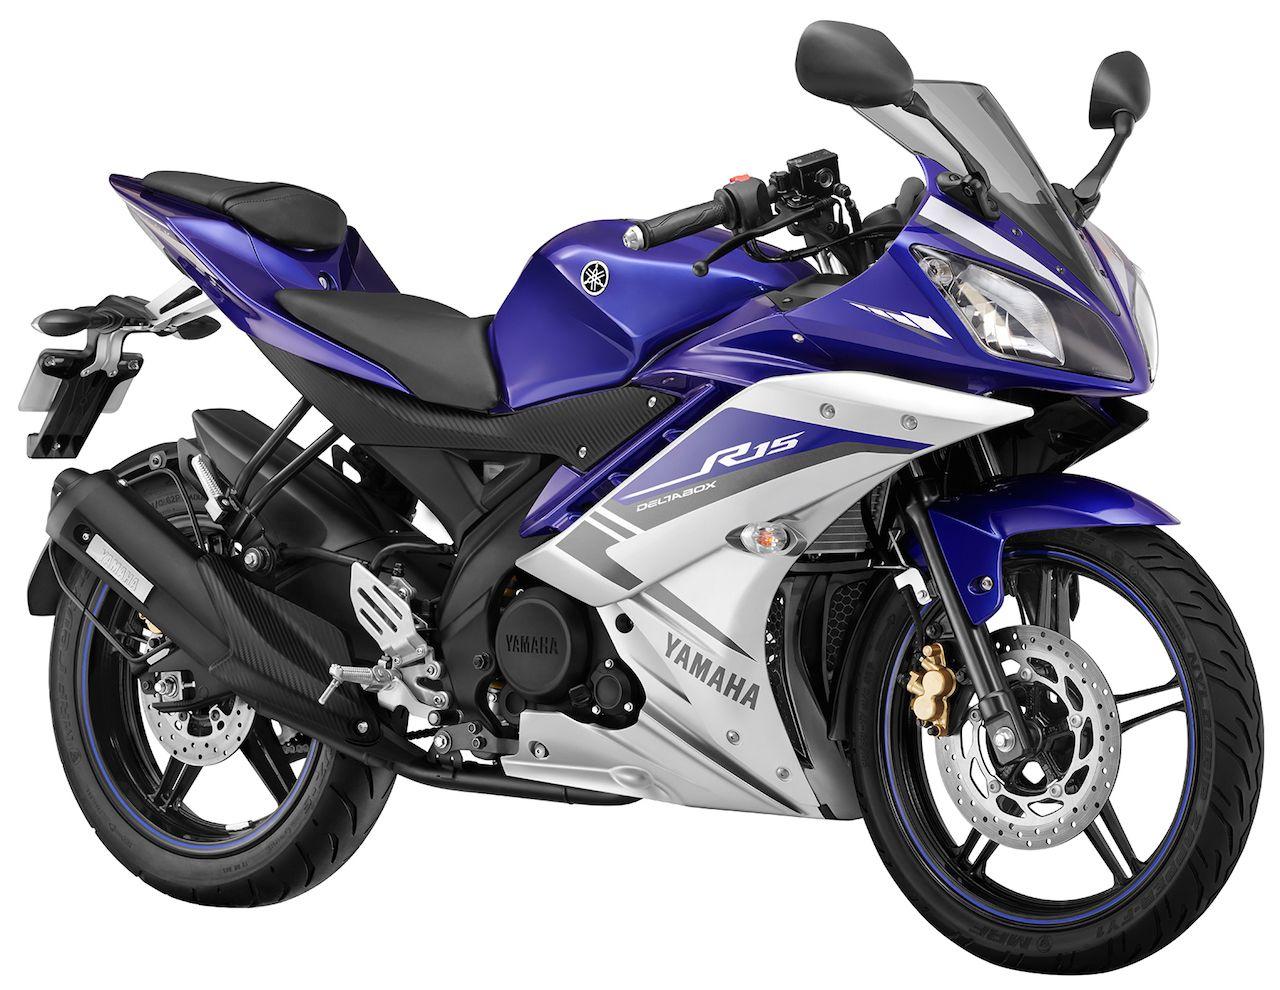 India Motor Yamaha has announced the launch of new color options